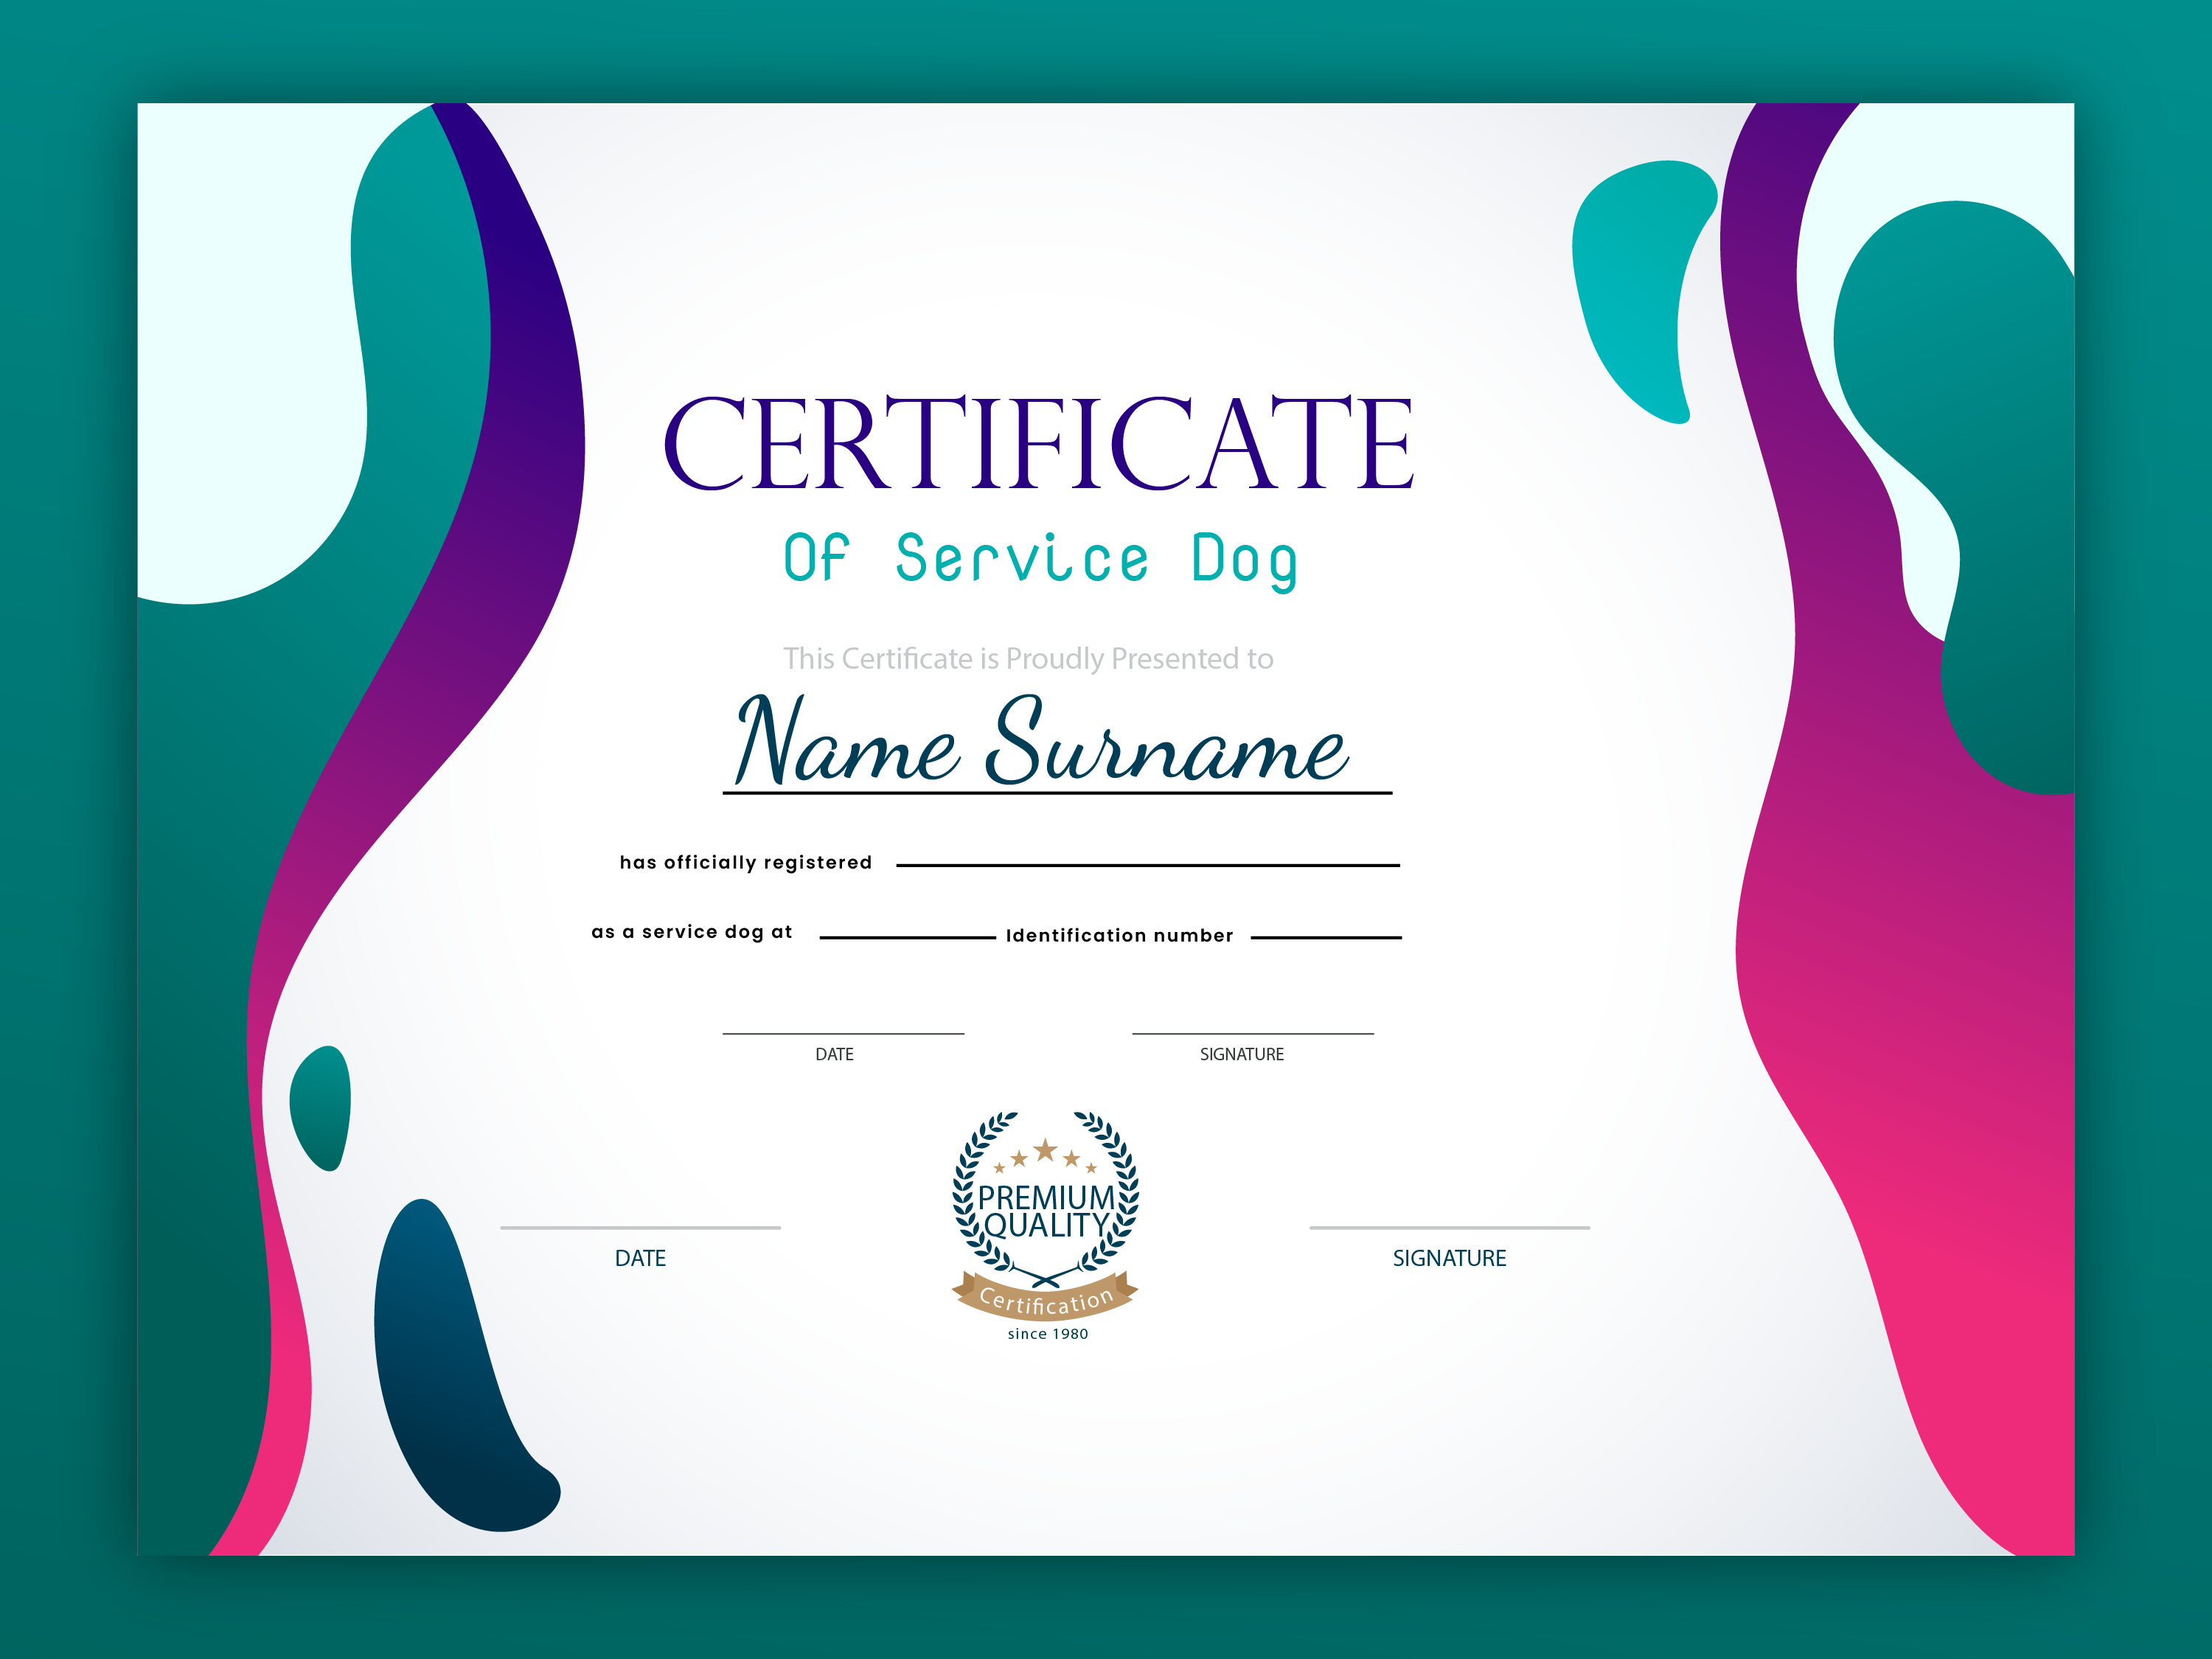 download-now-printable-service-dog-certification-in-ai-files